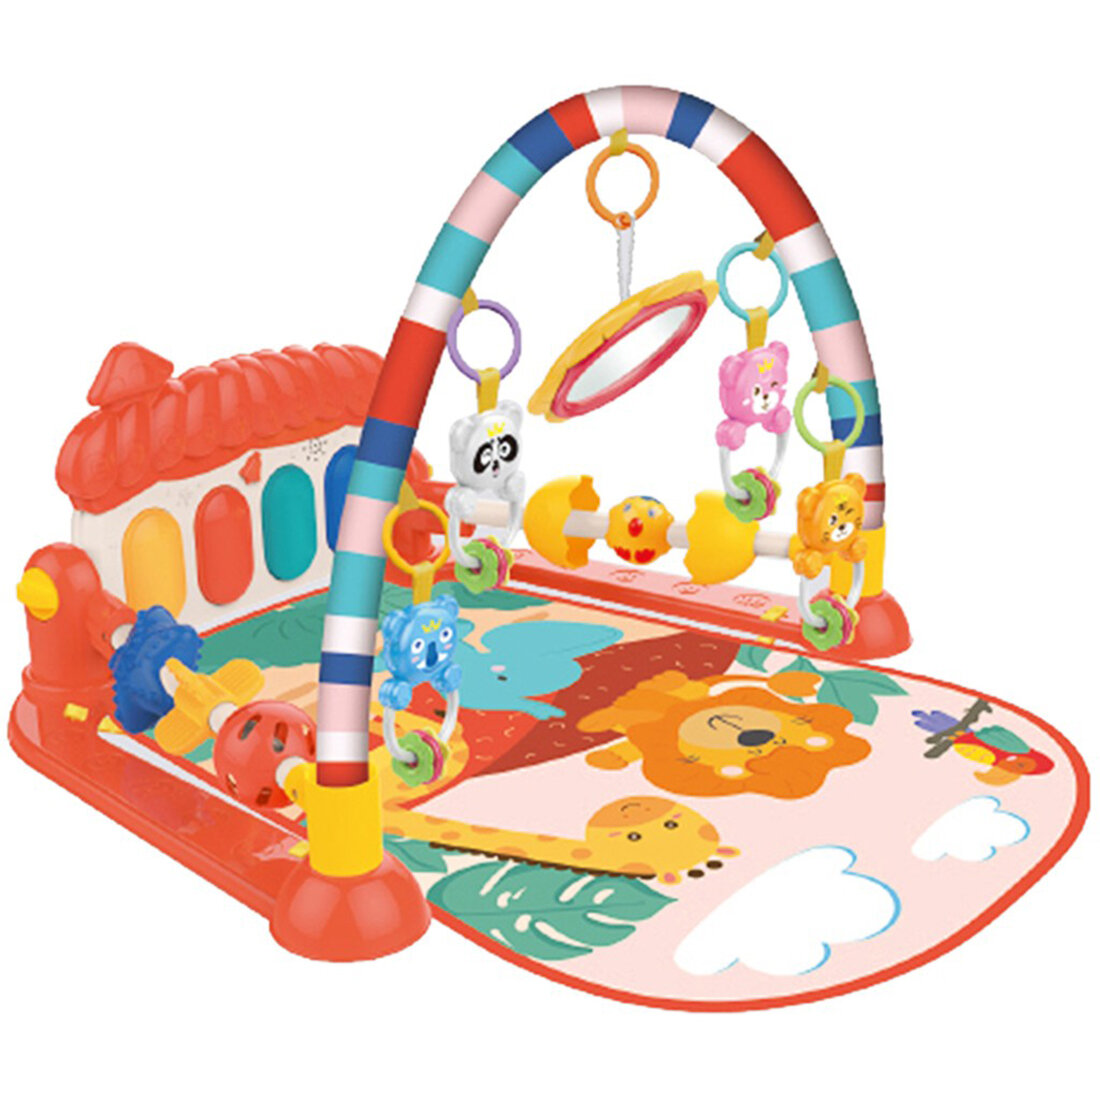 3 in 1 Baby Light Musical Gym Play Mat Lay & Play Fitness Fun Piano Boy Girl NEW 